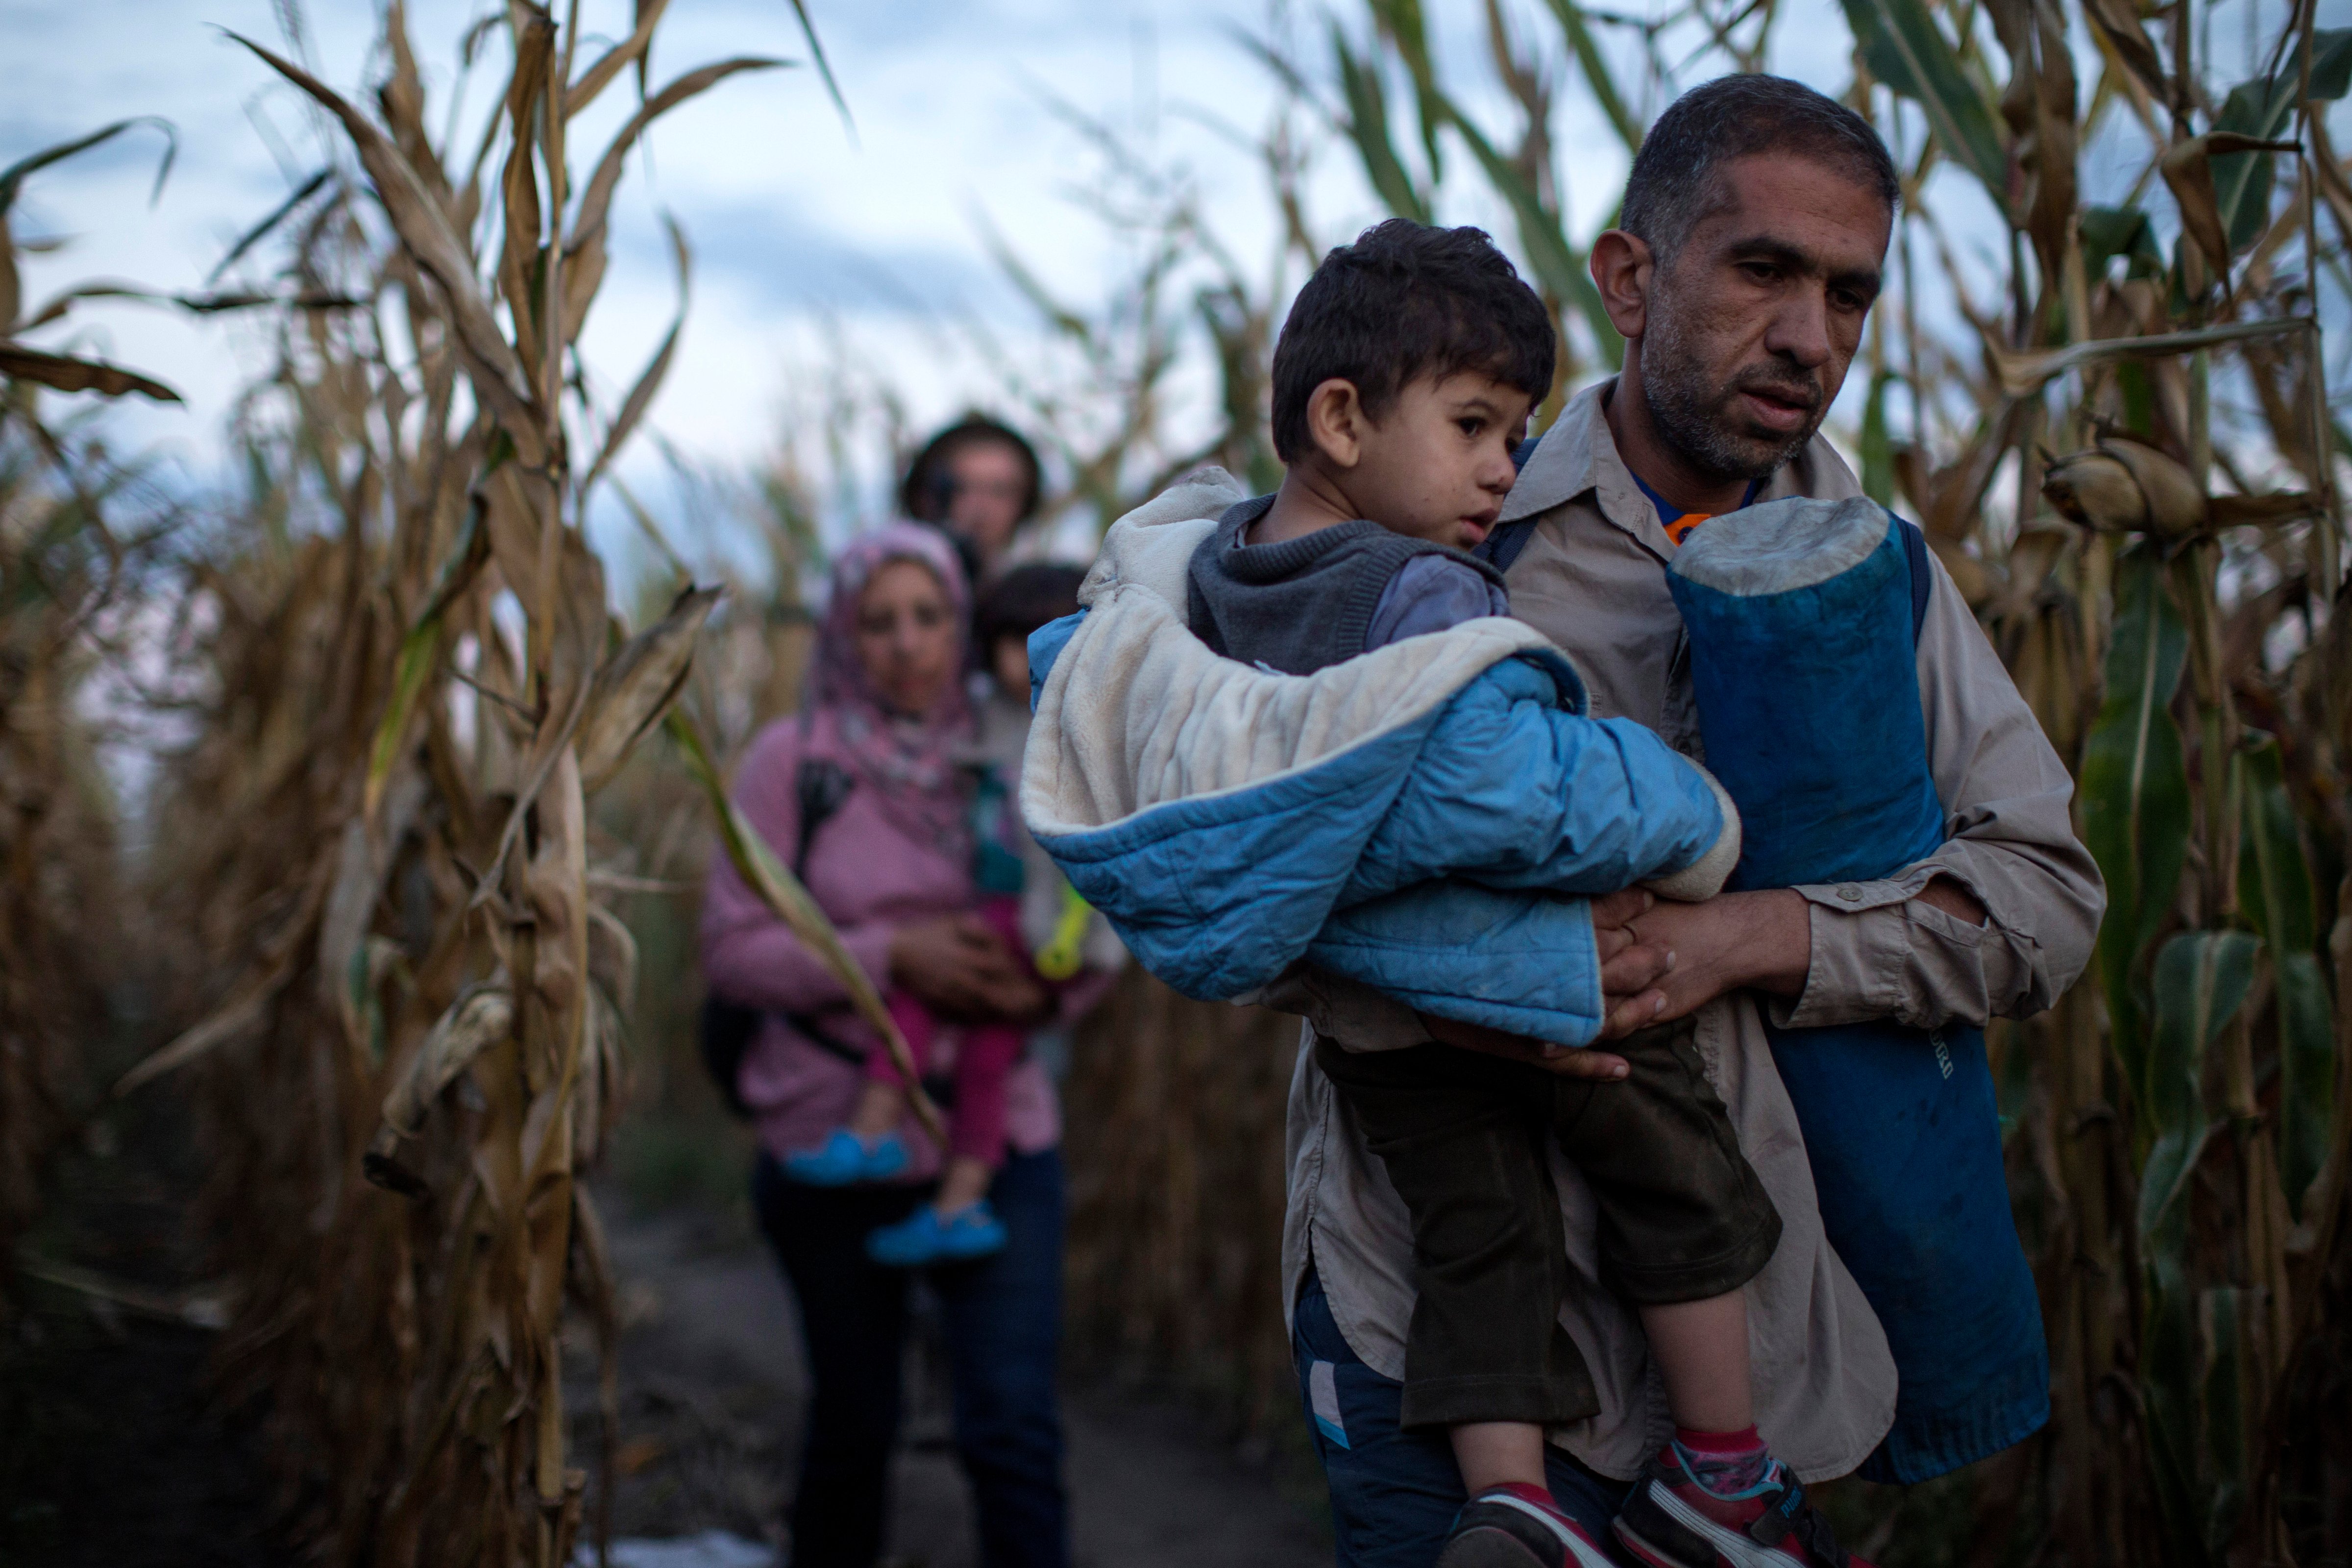 Refugees are smuggled through fields and forests in an attempt to evade the Hungarian police close to the Serbian border on September 8, 2015 in Roszke, Hungary.